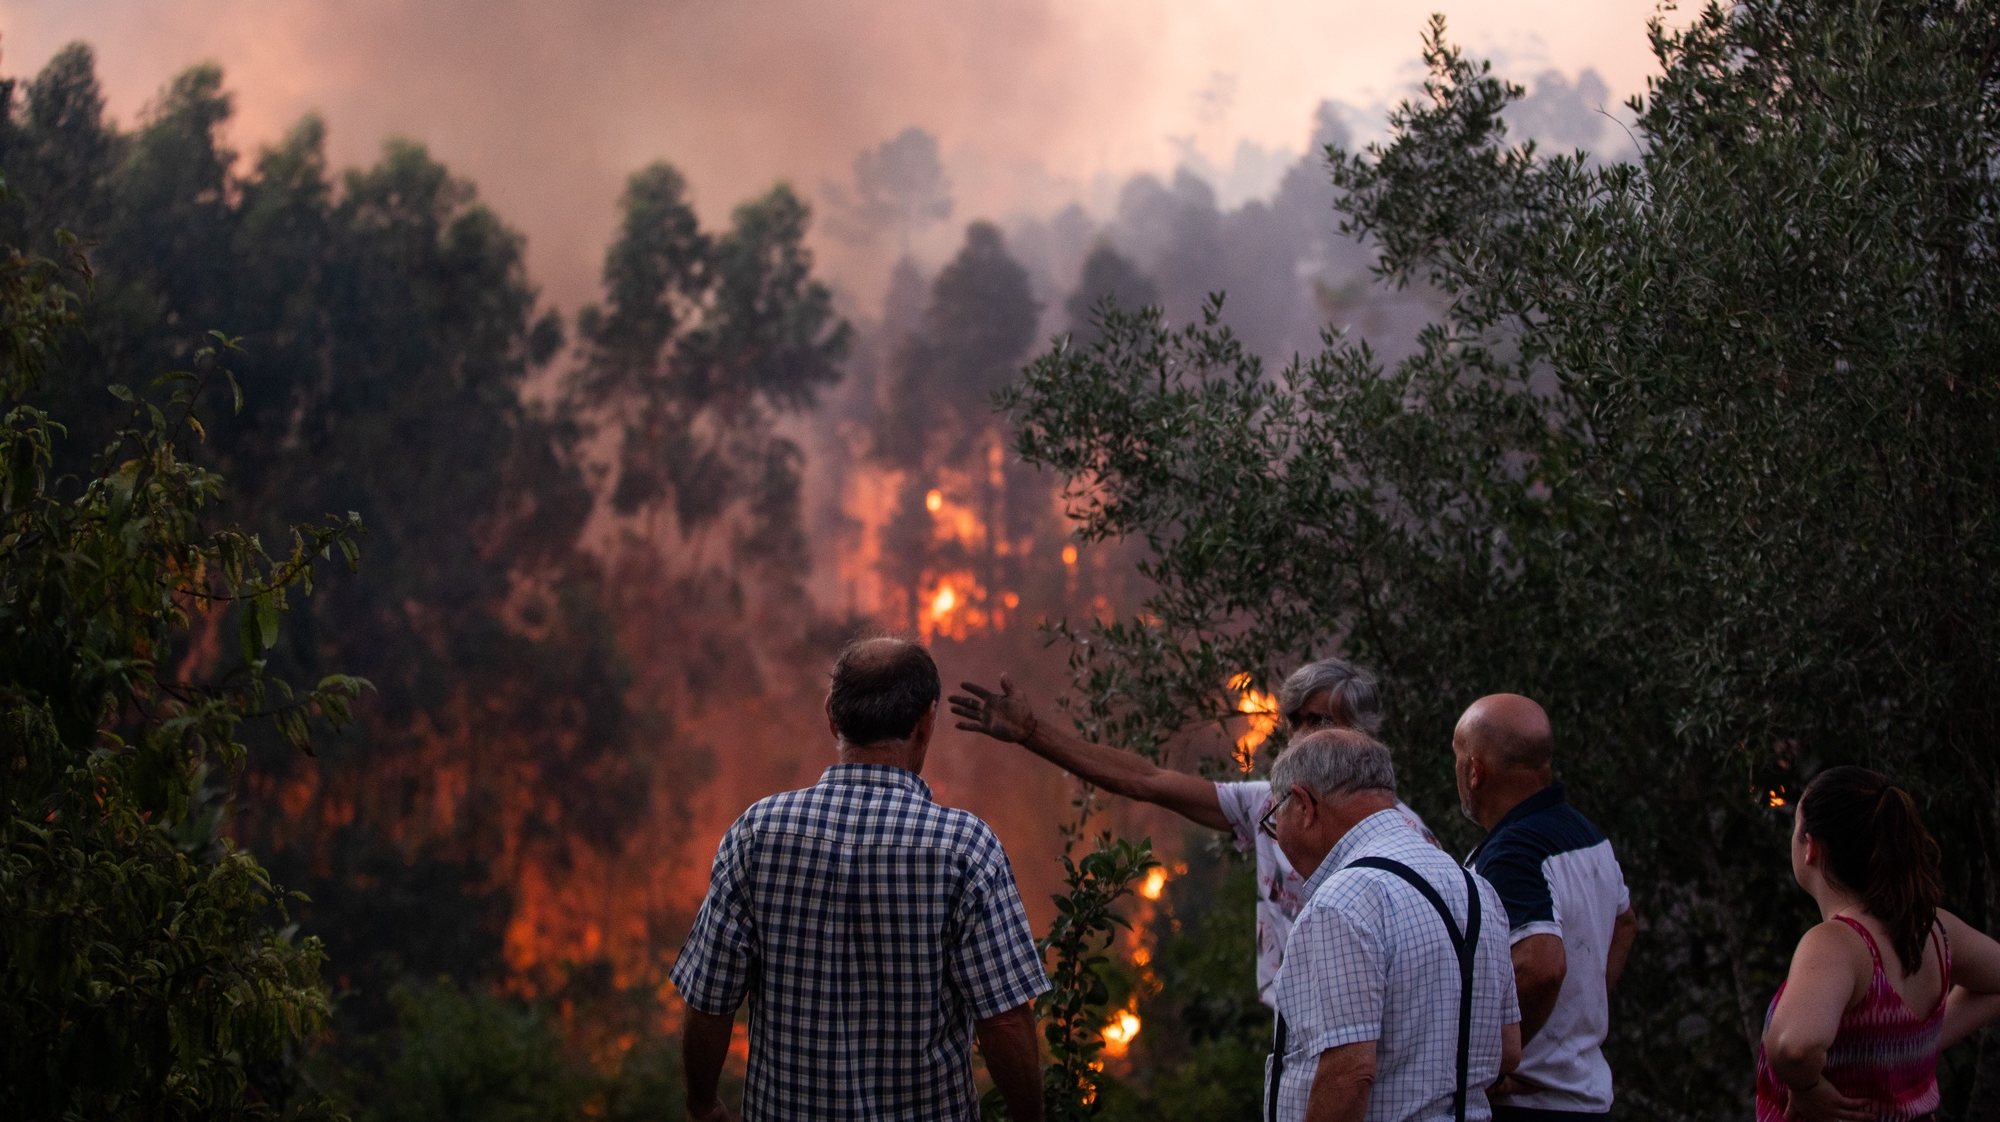 People watch the flames consuming the trees during a forest fire at Matas de Espite, Ourem, Portugal, 6th August 2023. PAULO CUNHA/LUSA